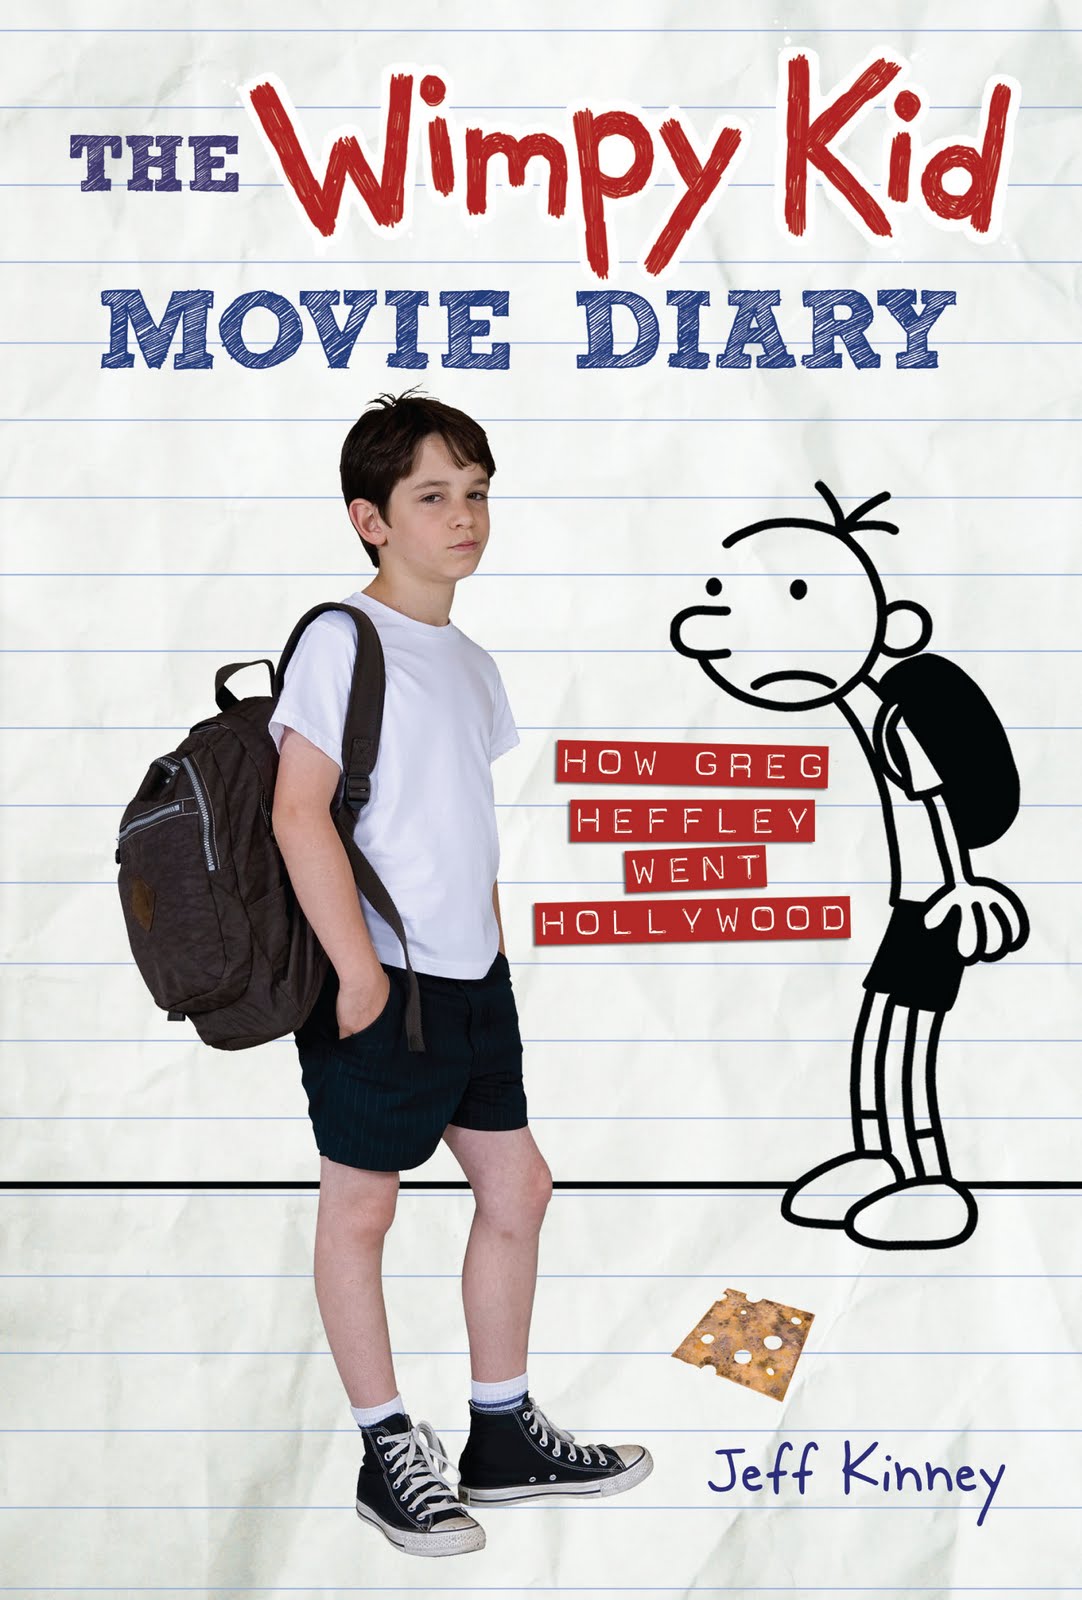 Coffee & Crackers: The Movie: Diary of a Wimpy Kid